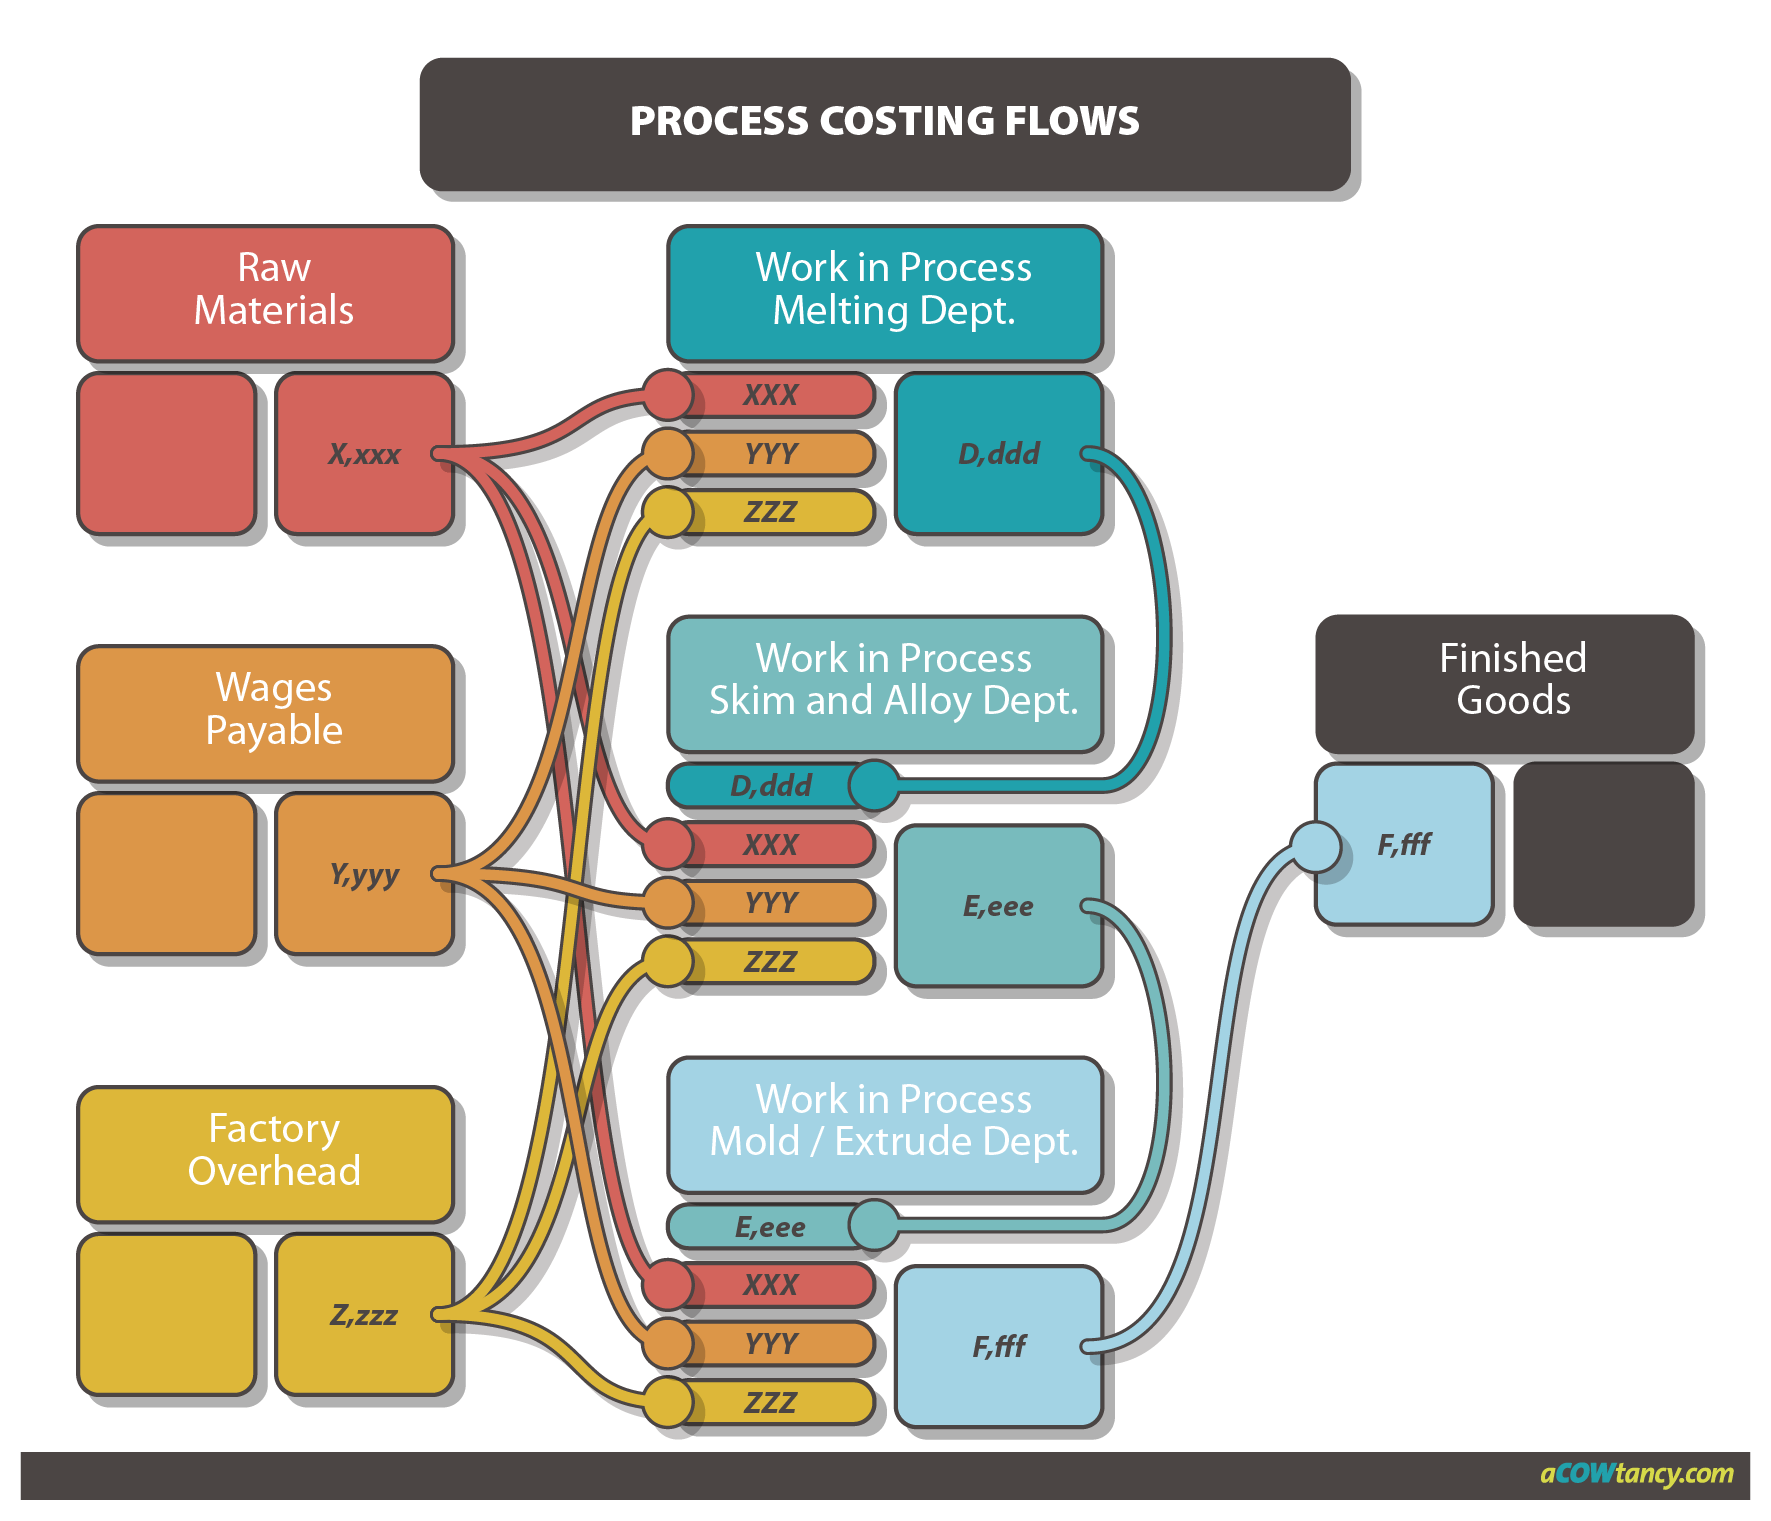 ACCA MA F2 student material Process Costing